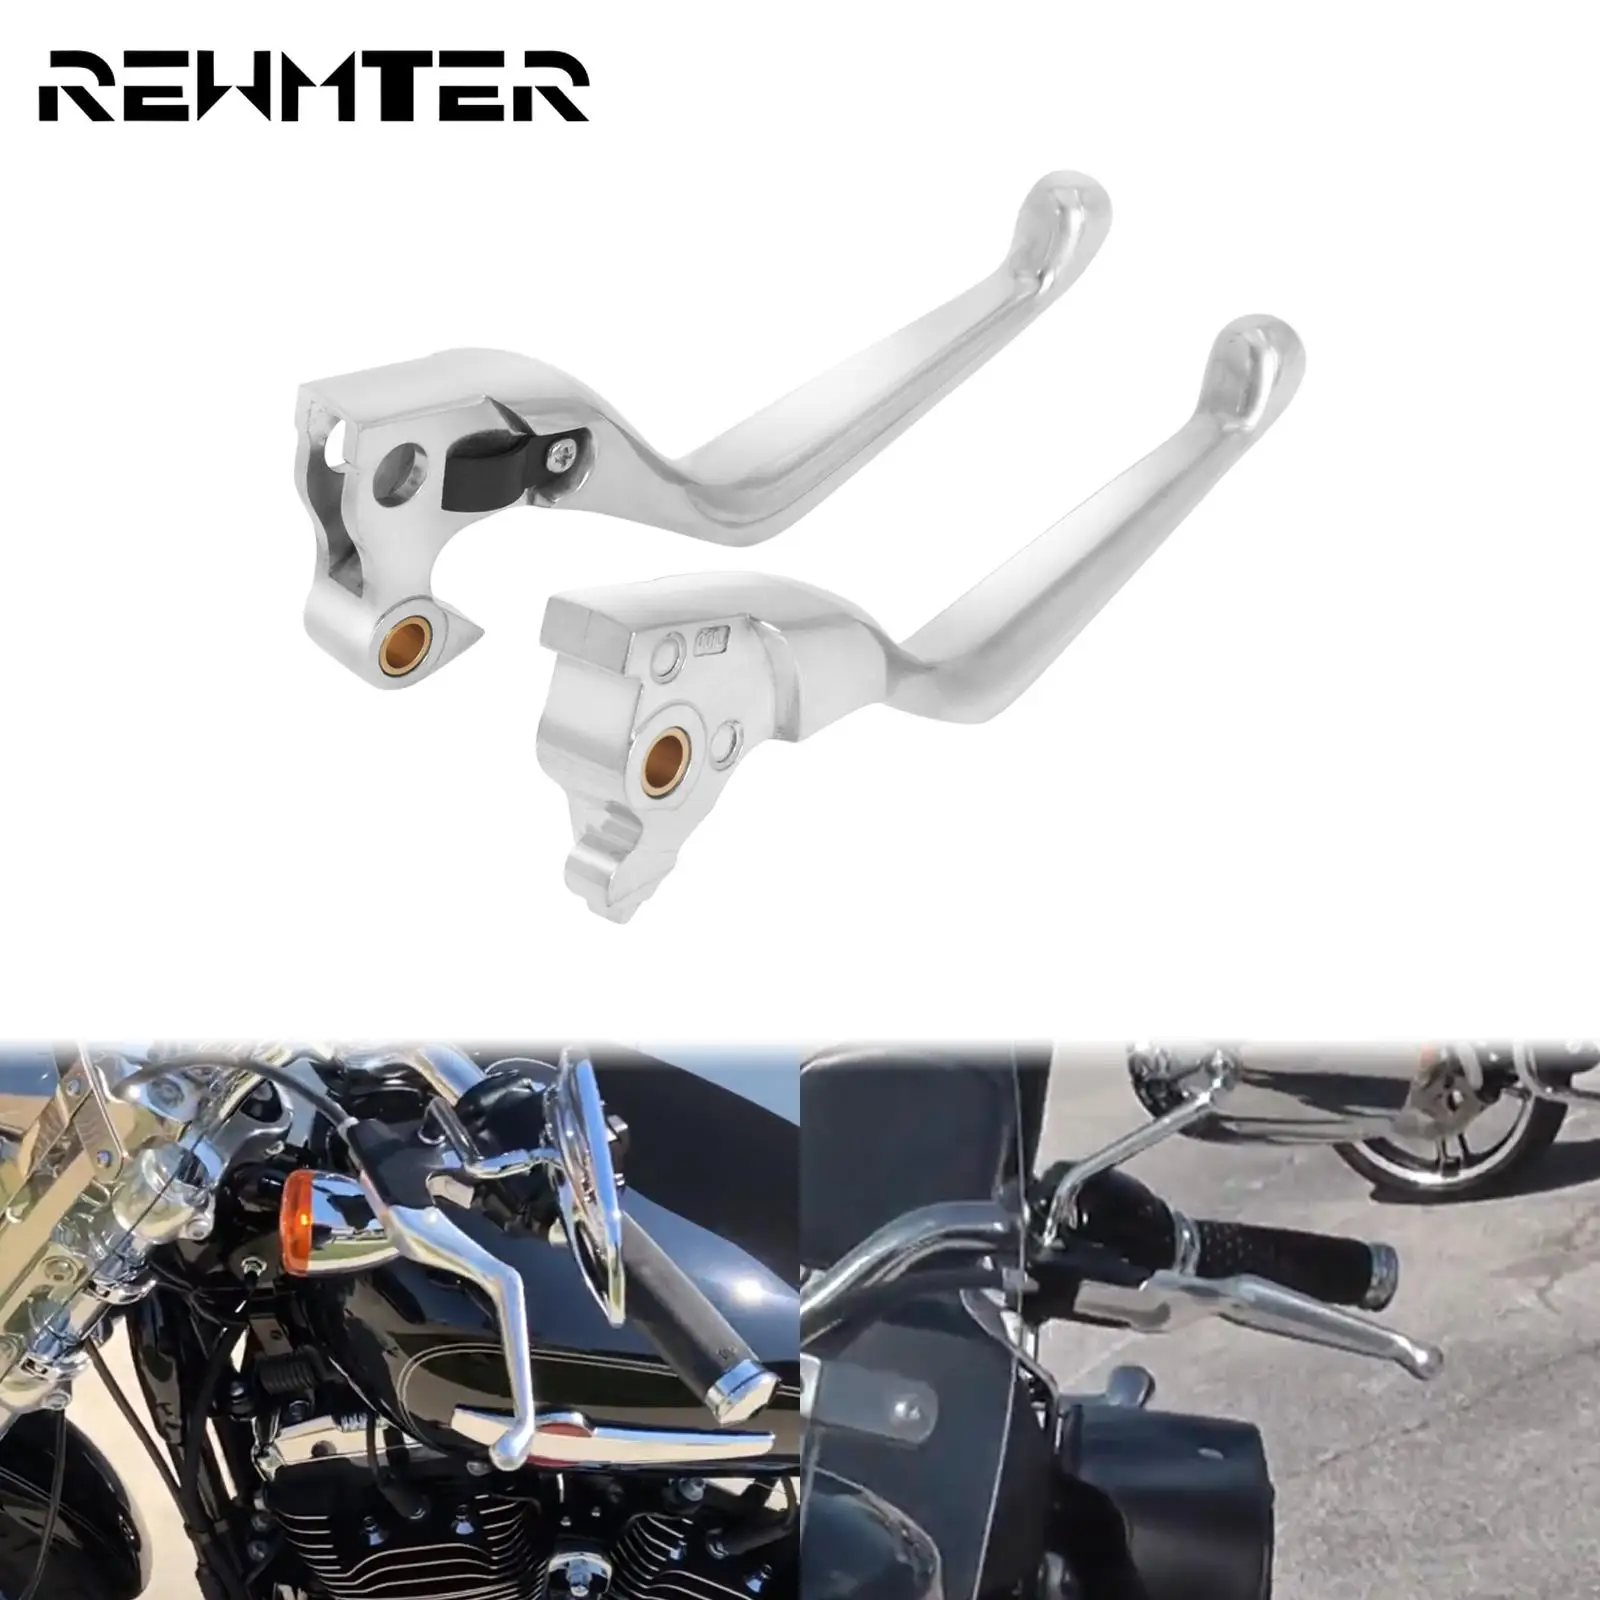 

2xMotorcycle Brake Clutch Lever Hand Control Chrome For Harley Sportster XL 883 1200 2014-2020 Roadster Nightster Iron Custom